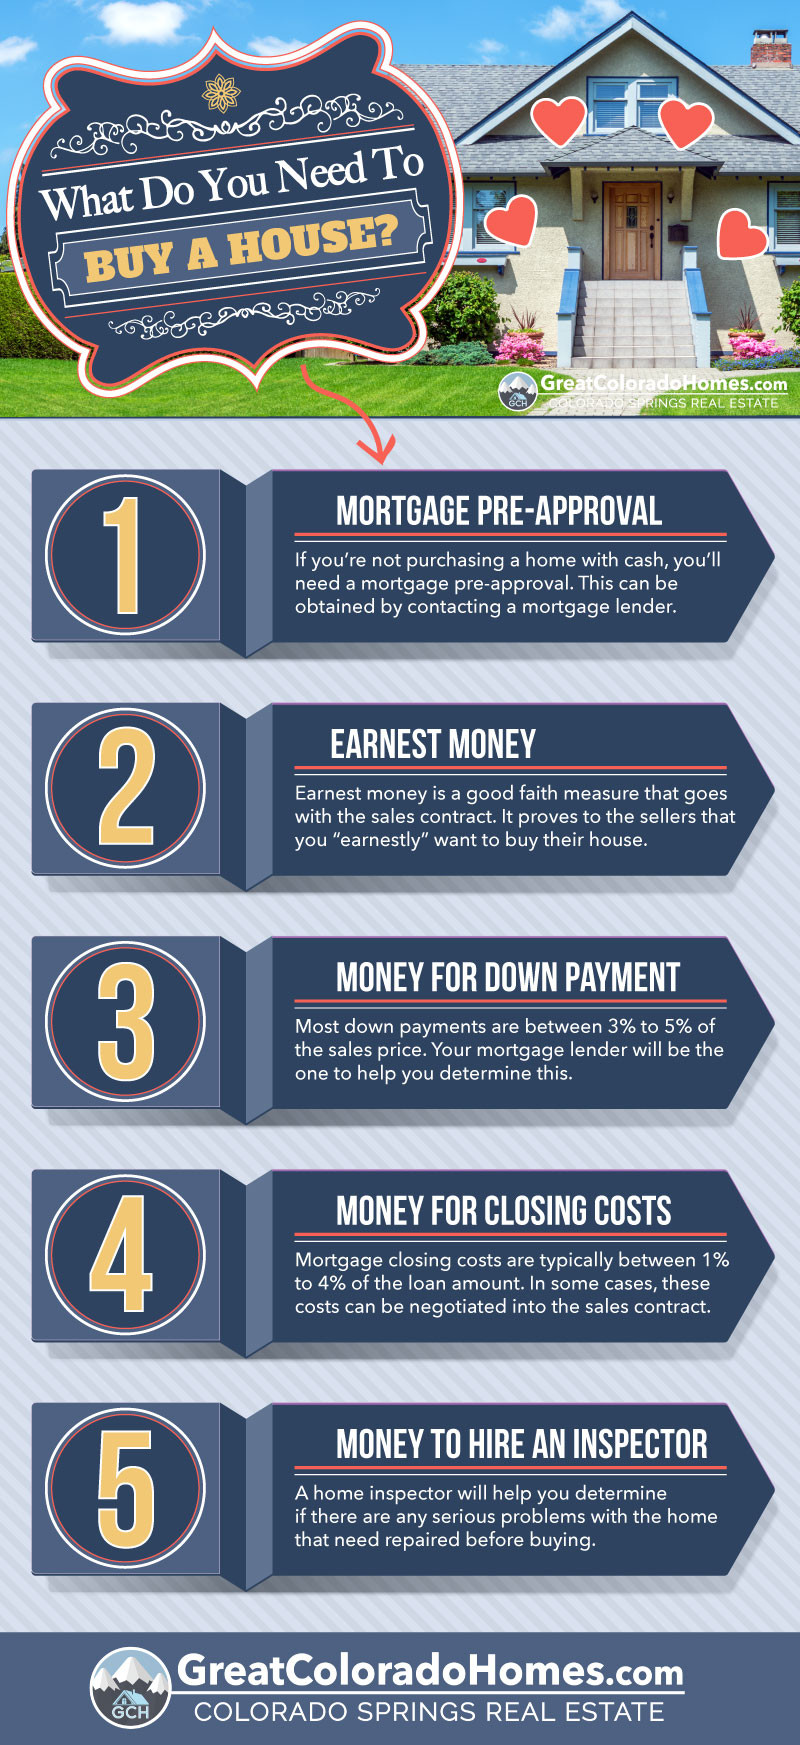 What Do You Need To Buy A House Infographic